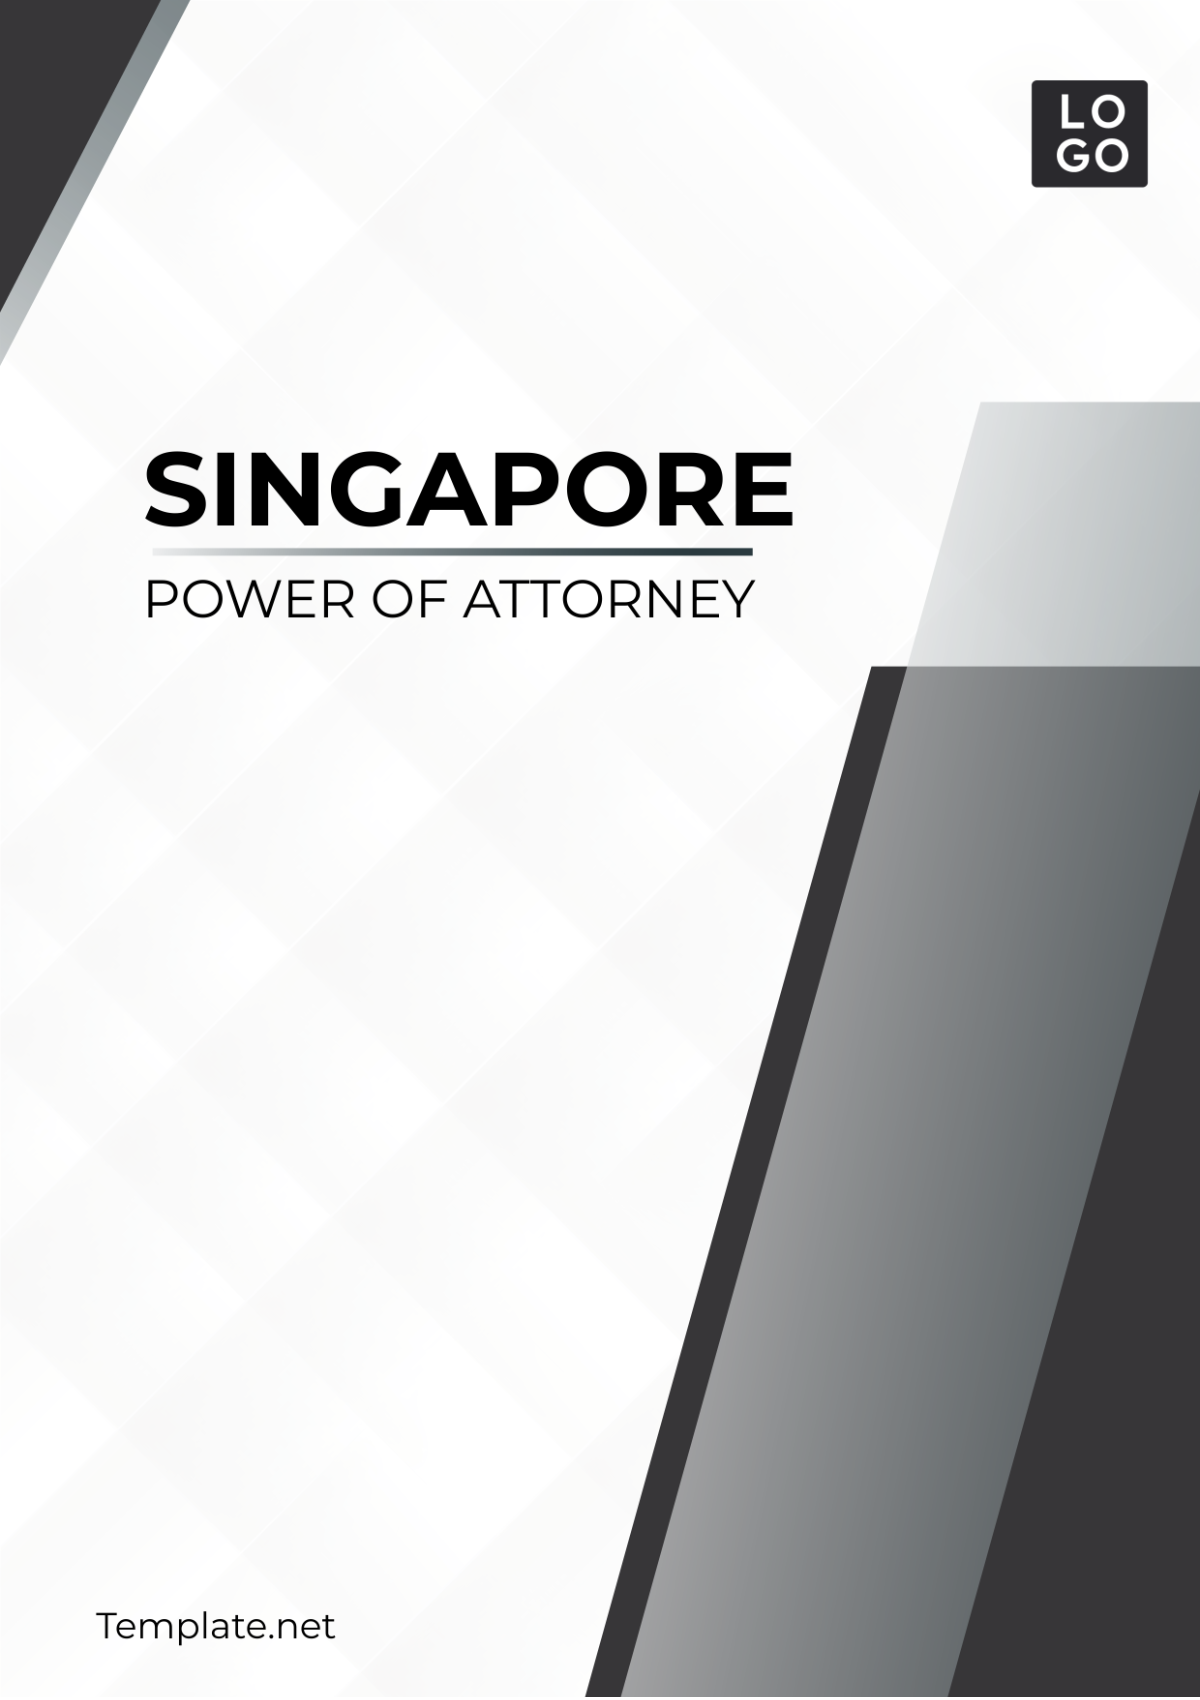 Singapore Power of Attorney Template